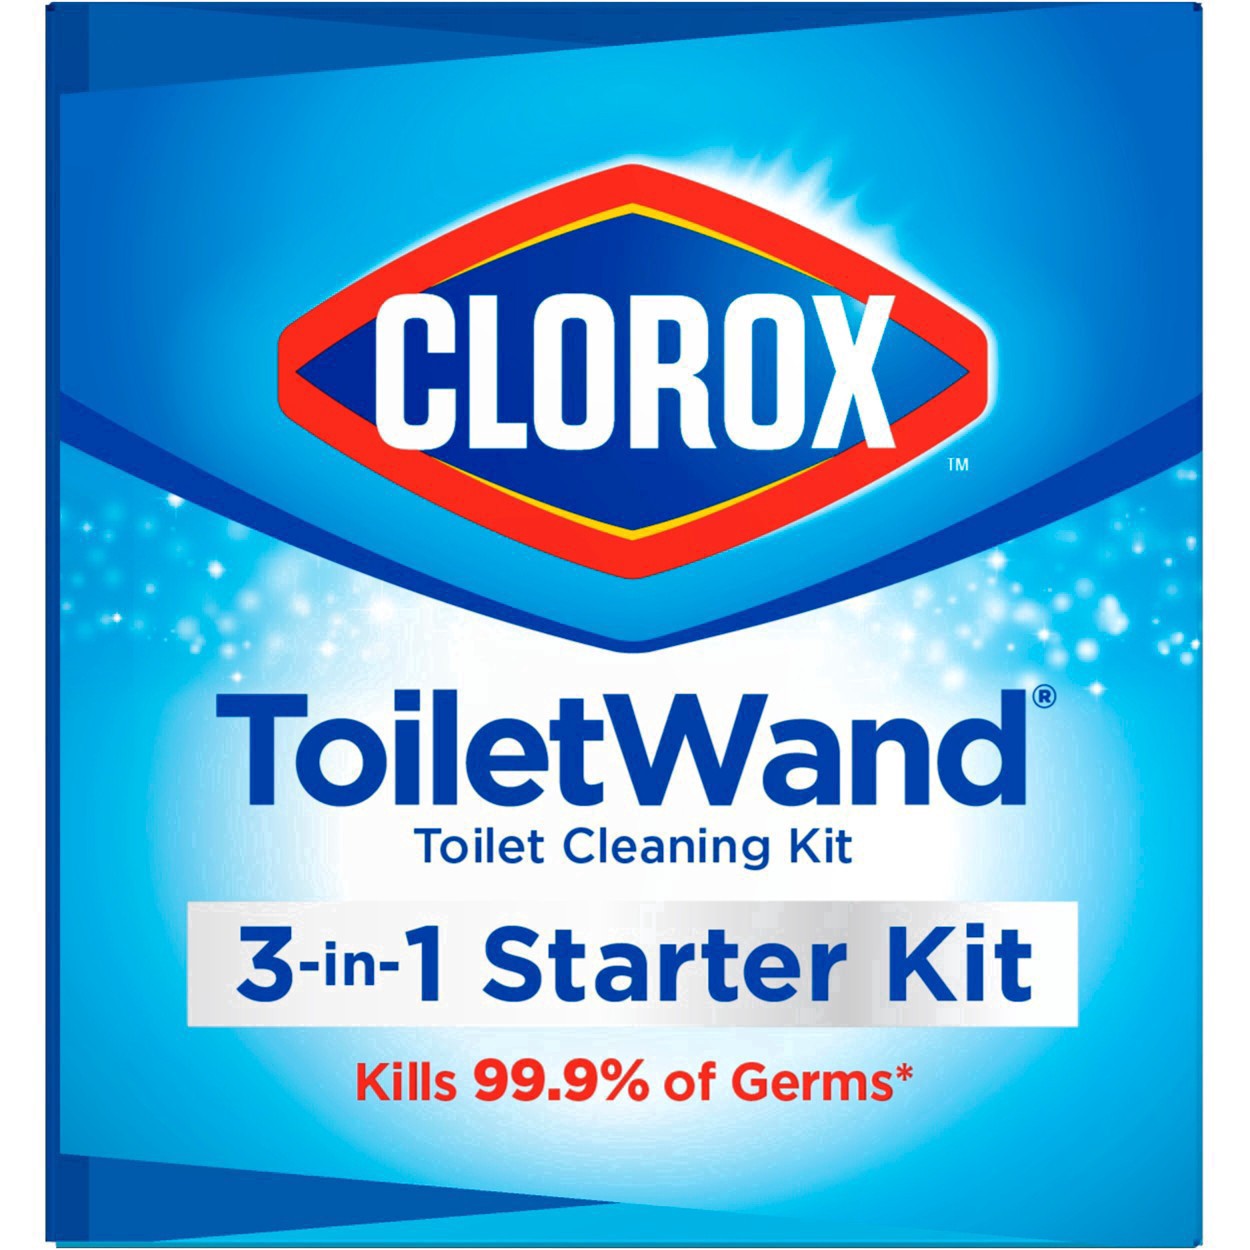 slide 55 of 176, Clorox Toilet Wand 3-in-1 Starter Toliet Cleaning Kit, 1 ct